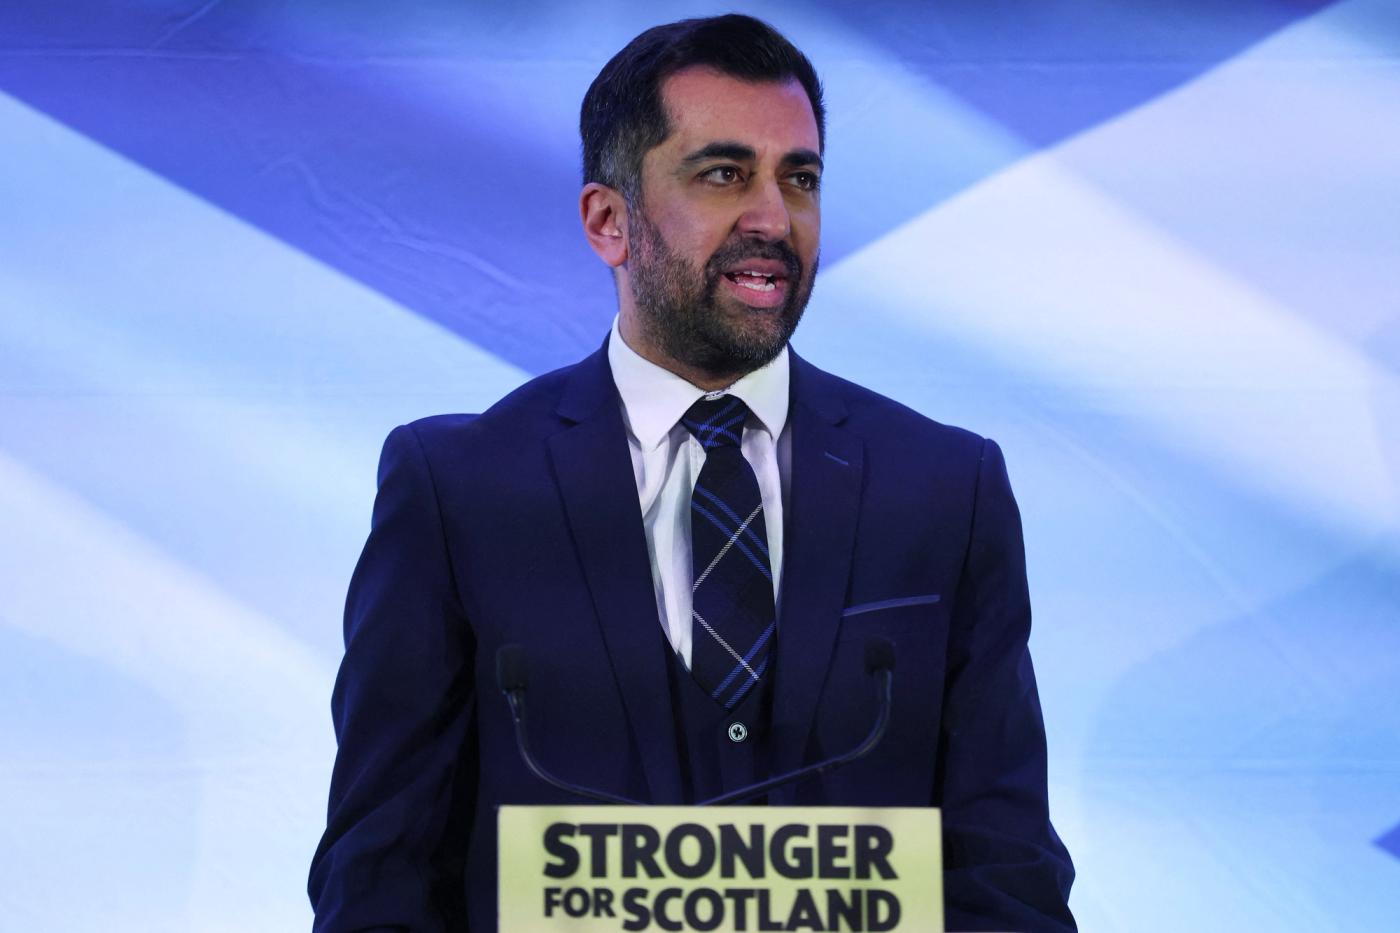 Humza Yousaf speaks as he is announced as the new Scottish National Party leader.